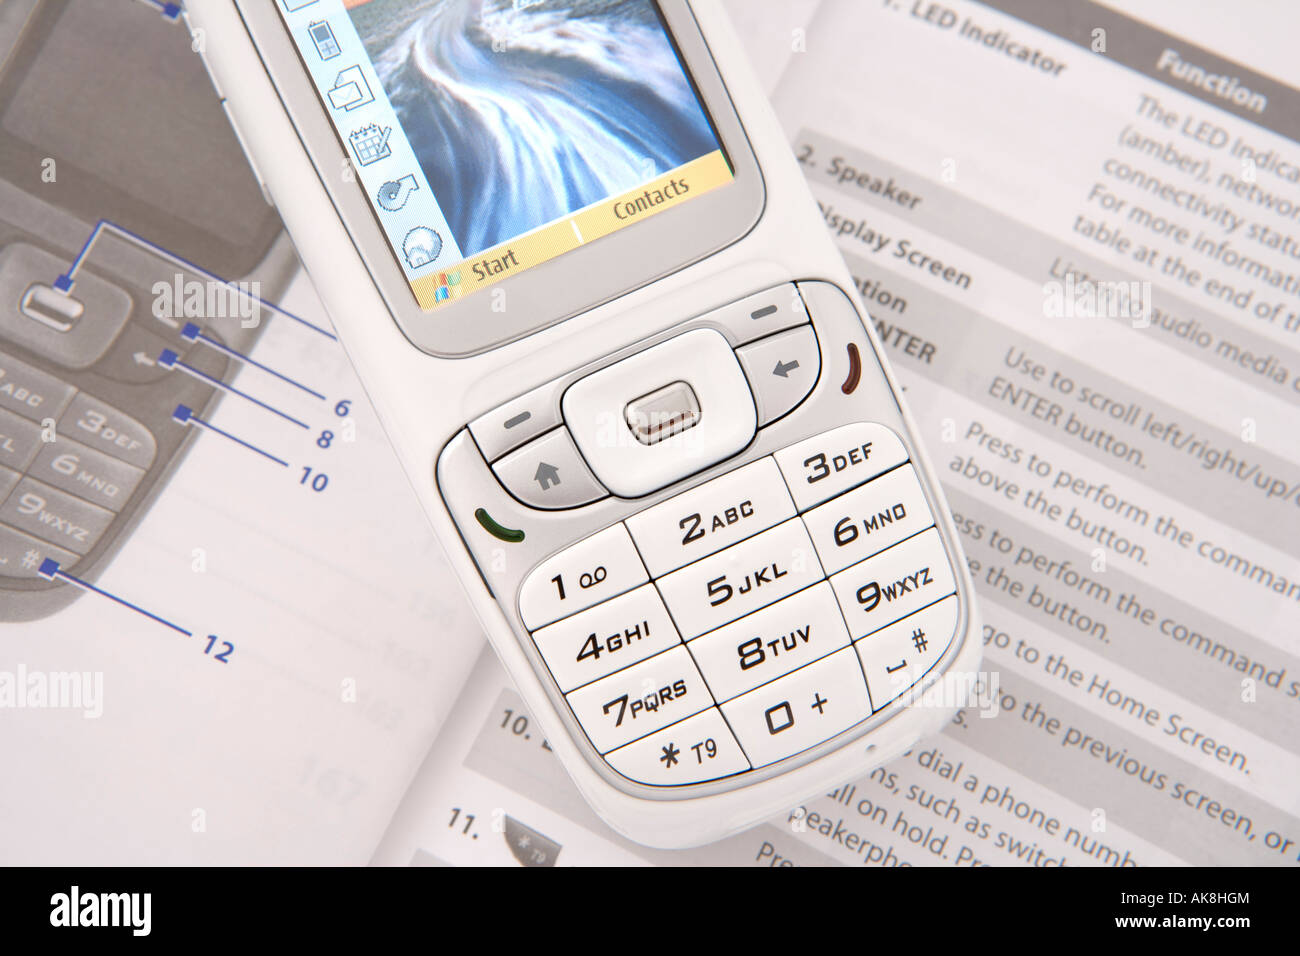 Mobile phone on top of open user manual and close up of text and symbols on the keys and keypad of a white phone Stock Photo